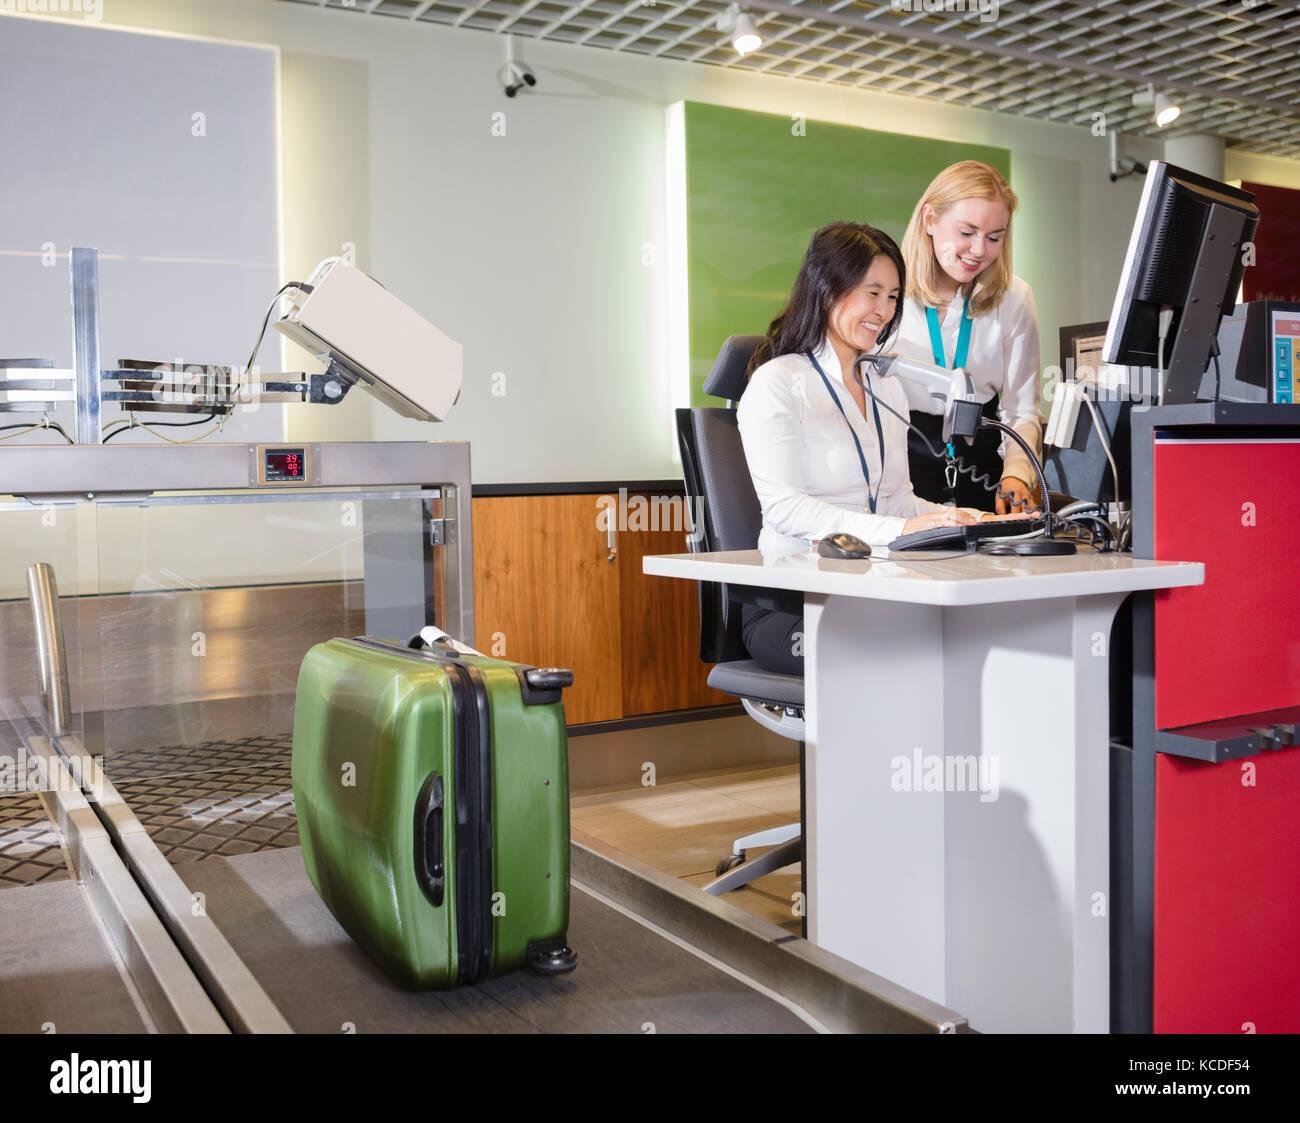 Smiling female staff weighing luggage at airport check-in desk Stock Photo